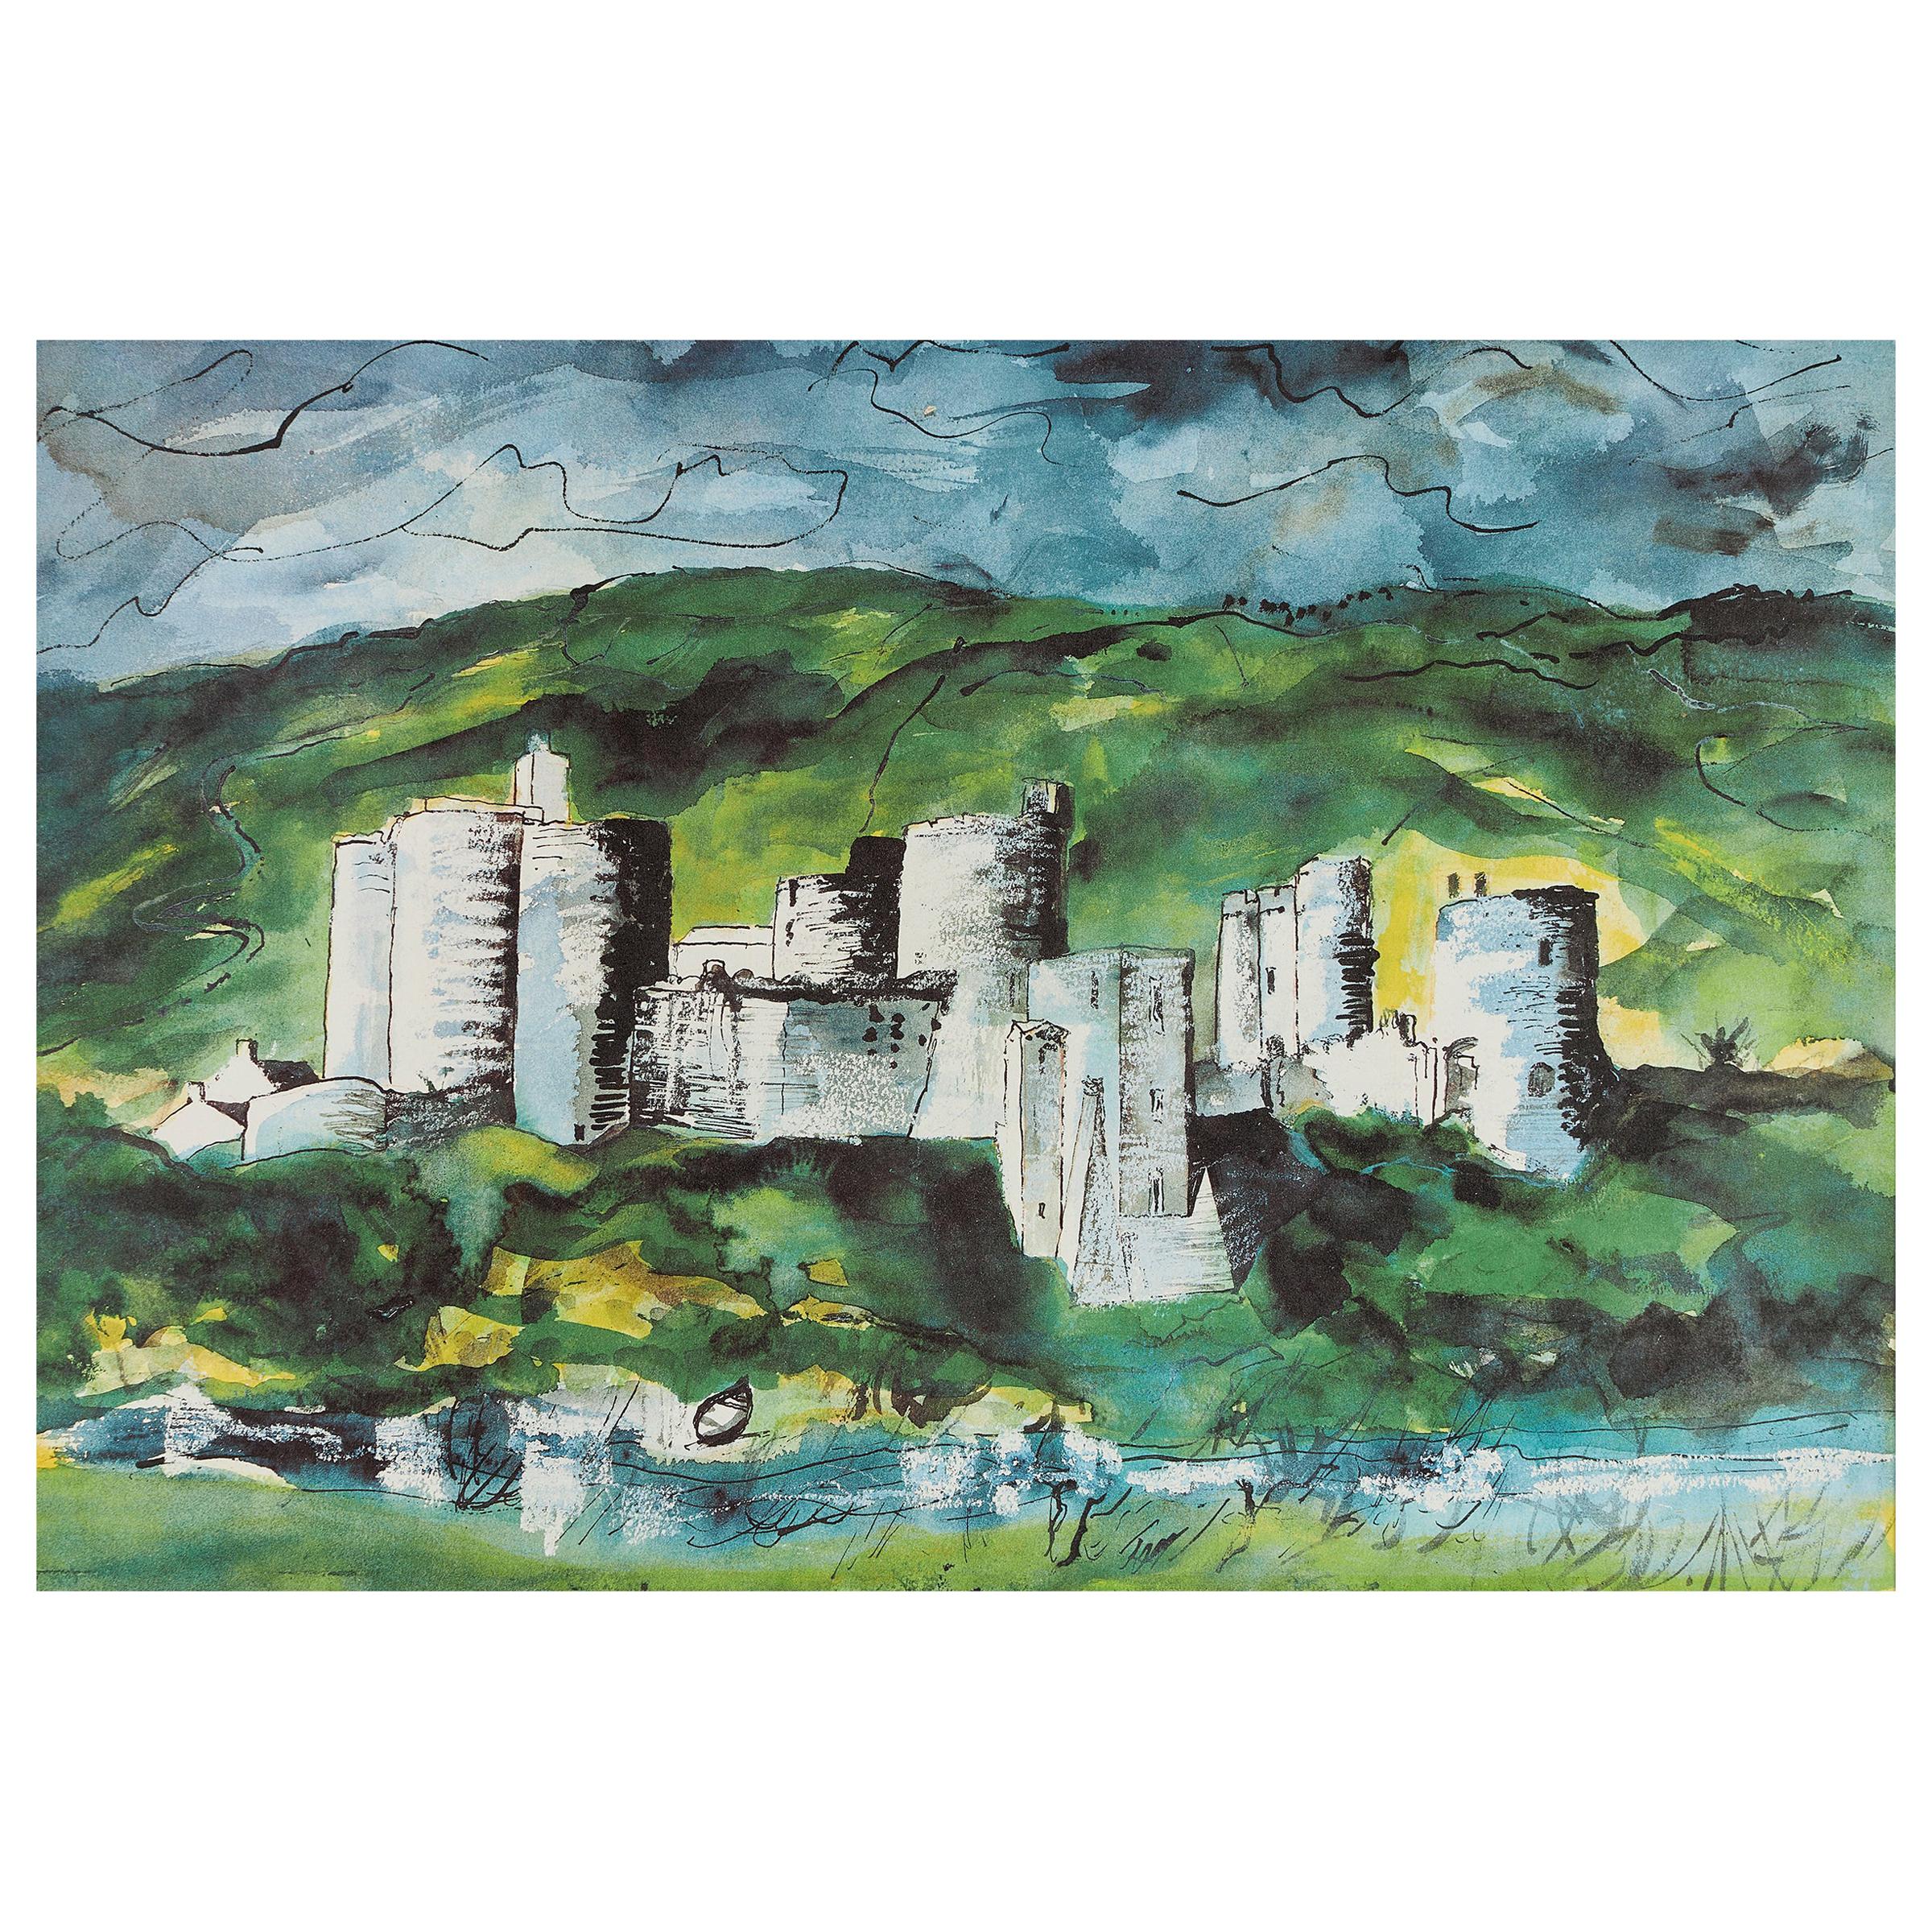 John Piper 'Kidwelly Castle' Lithograph